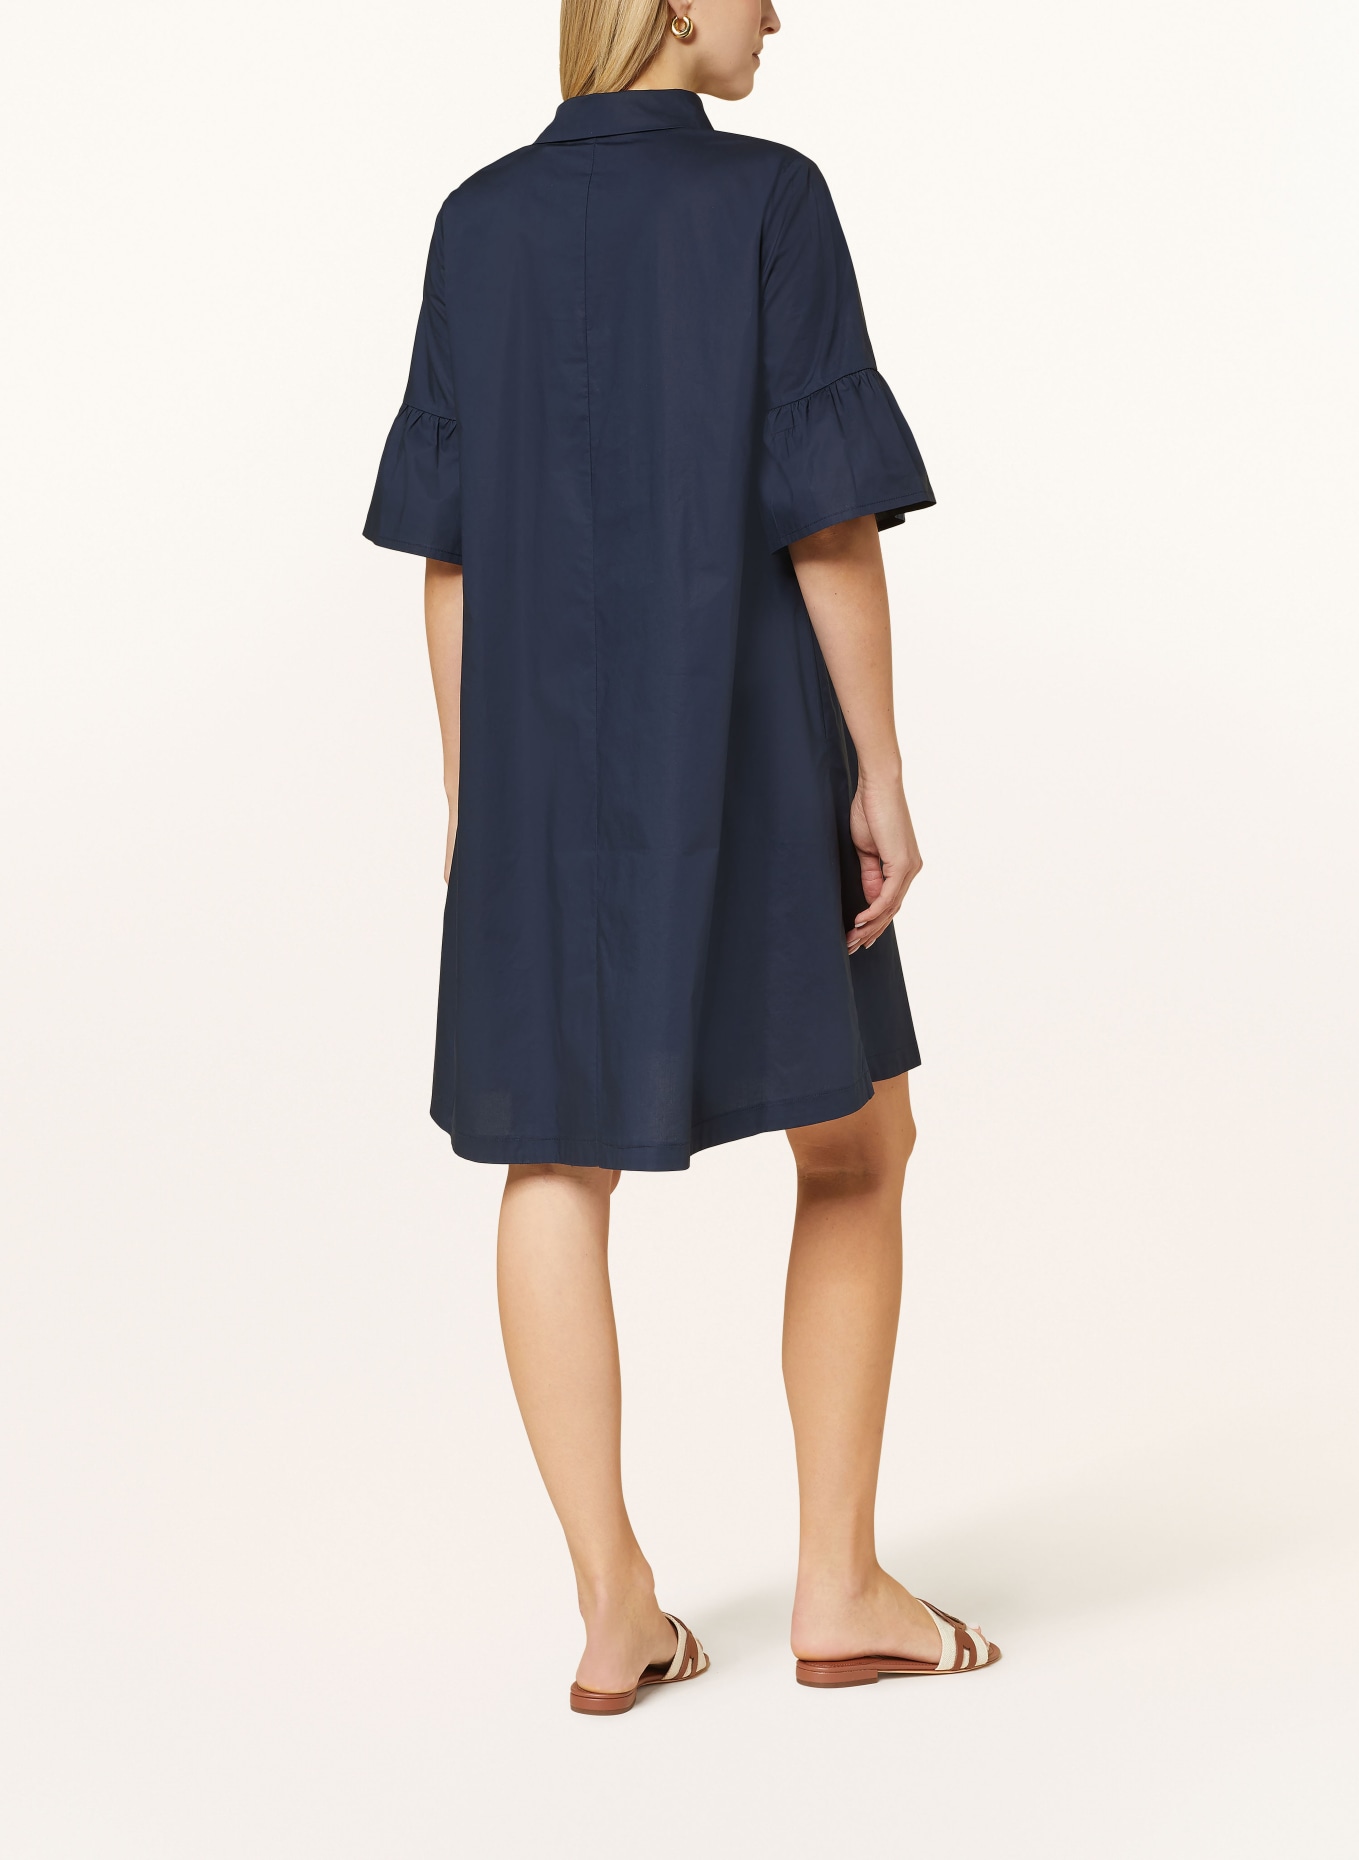 CATNOIR Dress with 3/4 sleeves, Color: 69 NAVY (Image 3)